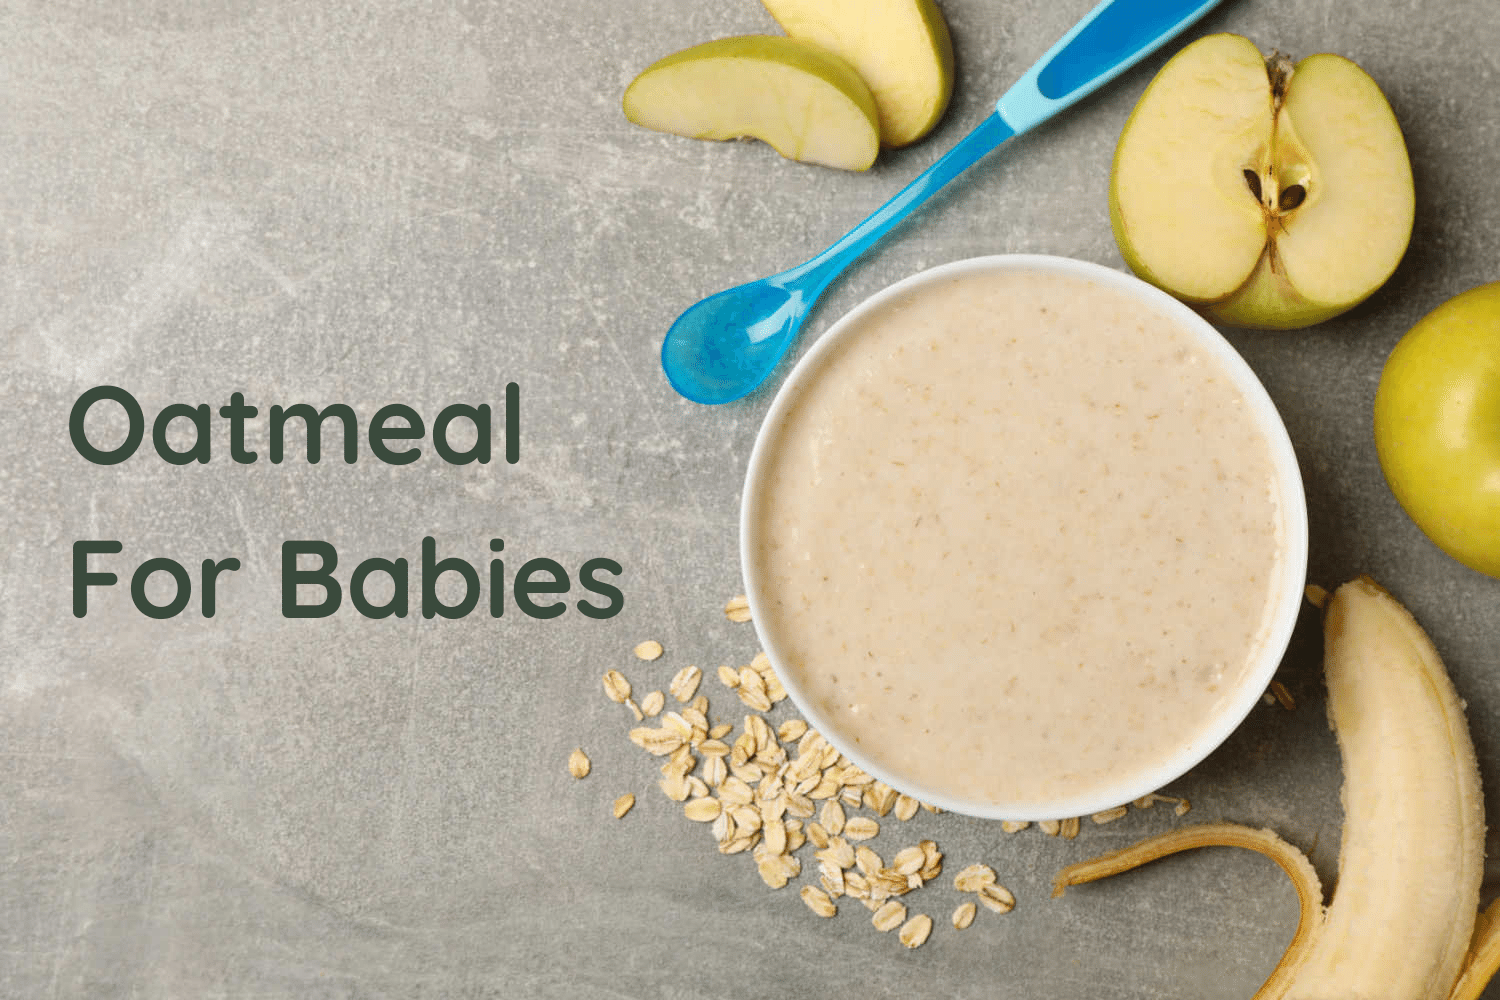 Oatmeal For Babies – When to Introduce, Benefits and How to Feed